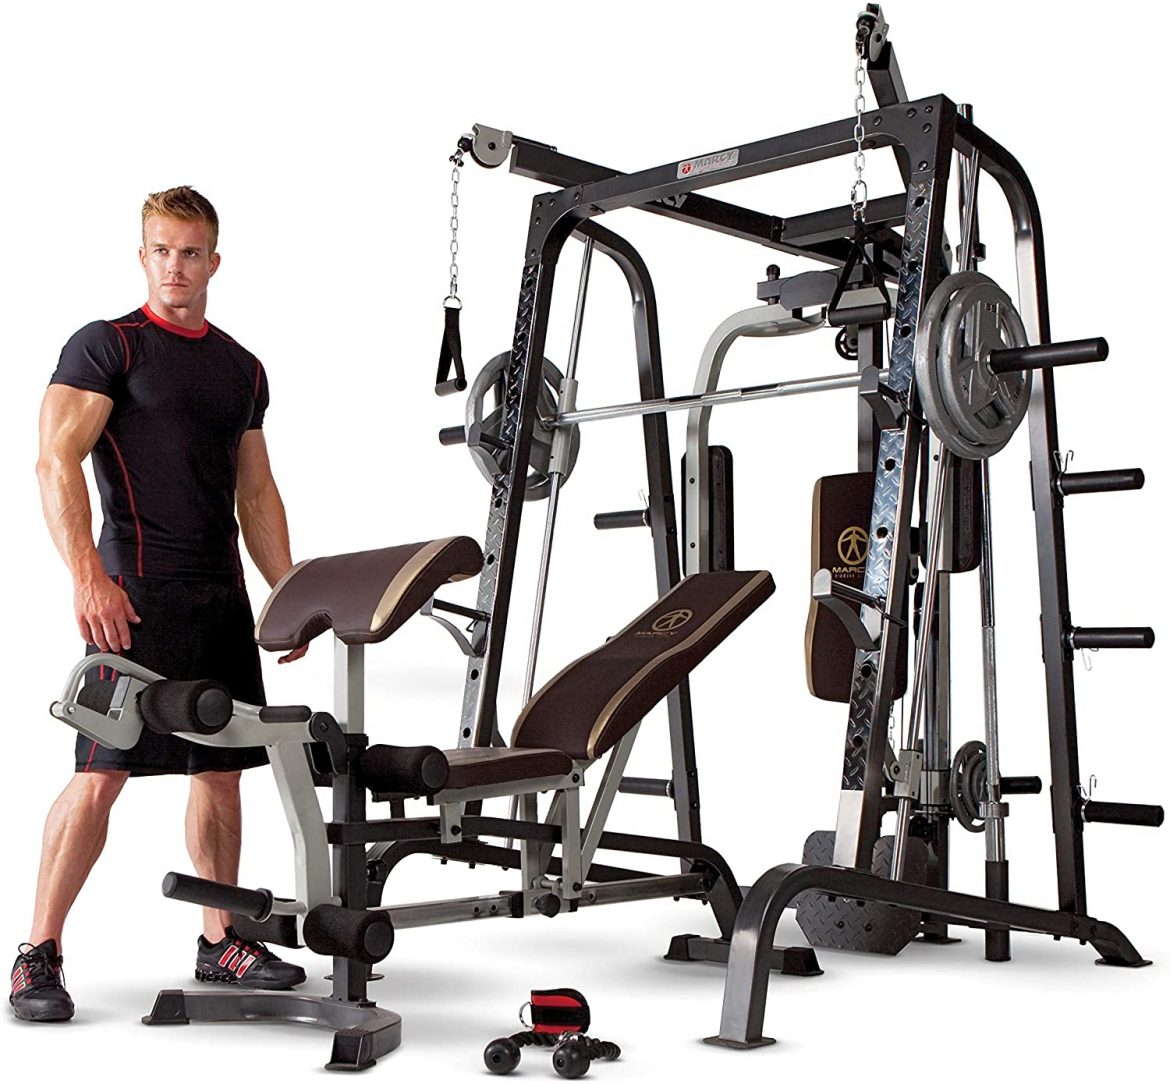 Best Home Gym Equipment and Benefits for using it